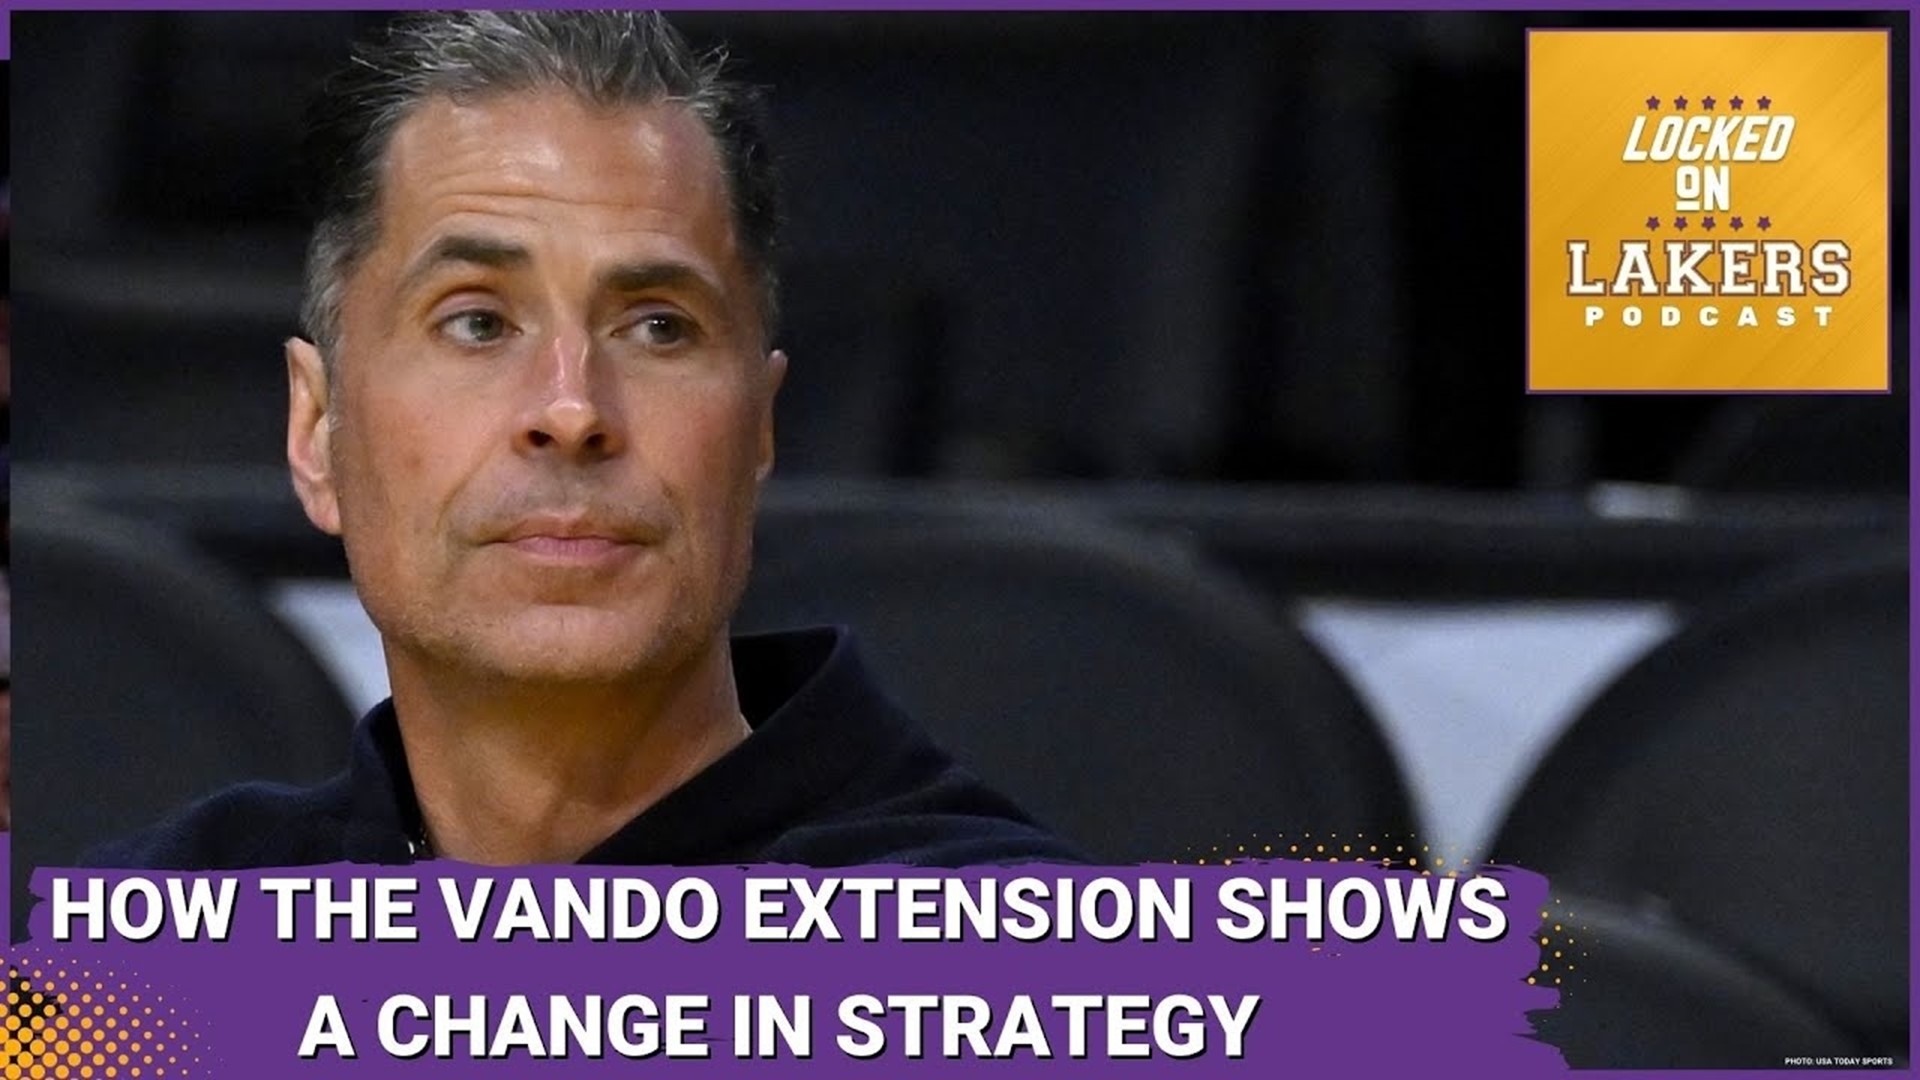 Vanderbilt's contract represents the last move in big change in team-building philosophy for the Lakers. So does this limit their flexibility? Spoiler alert: It does